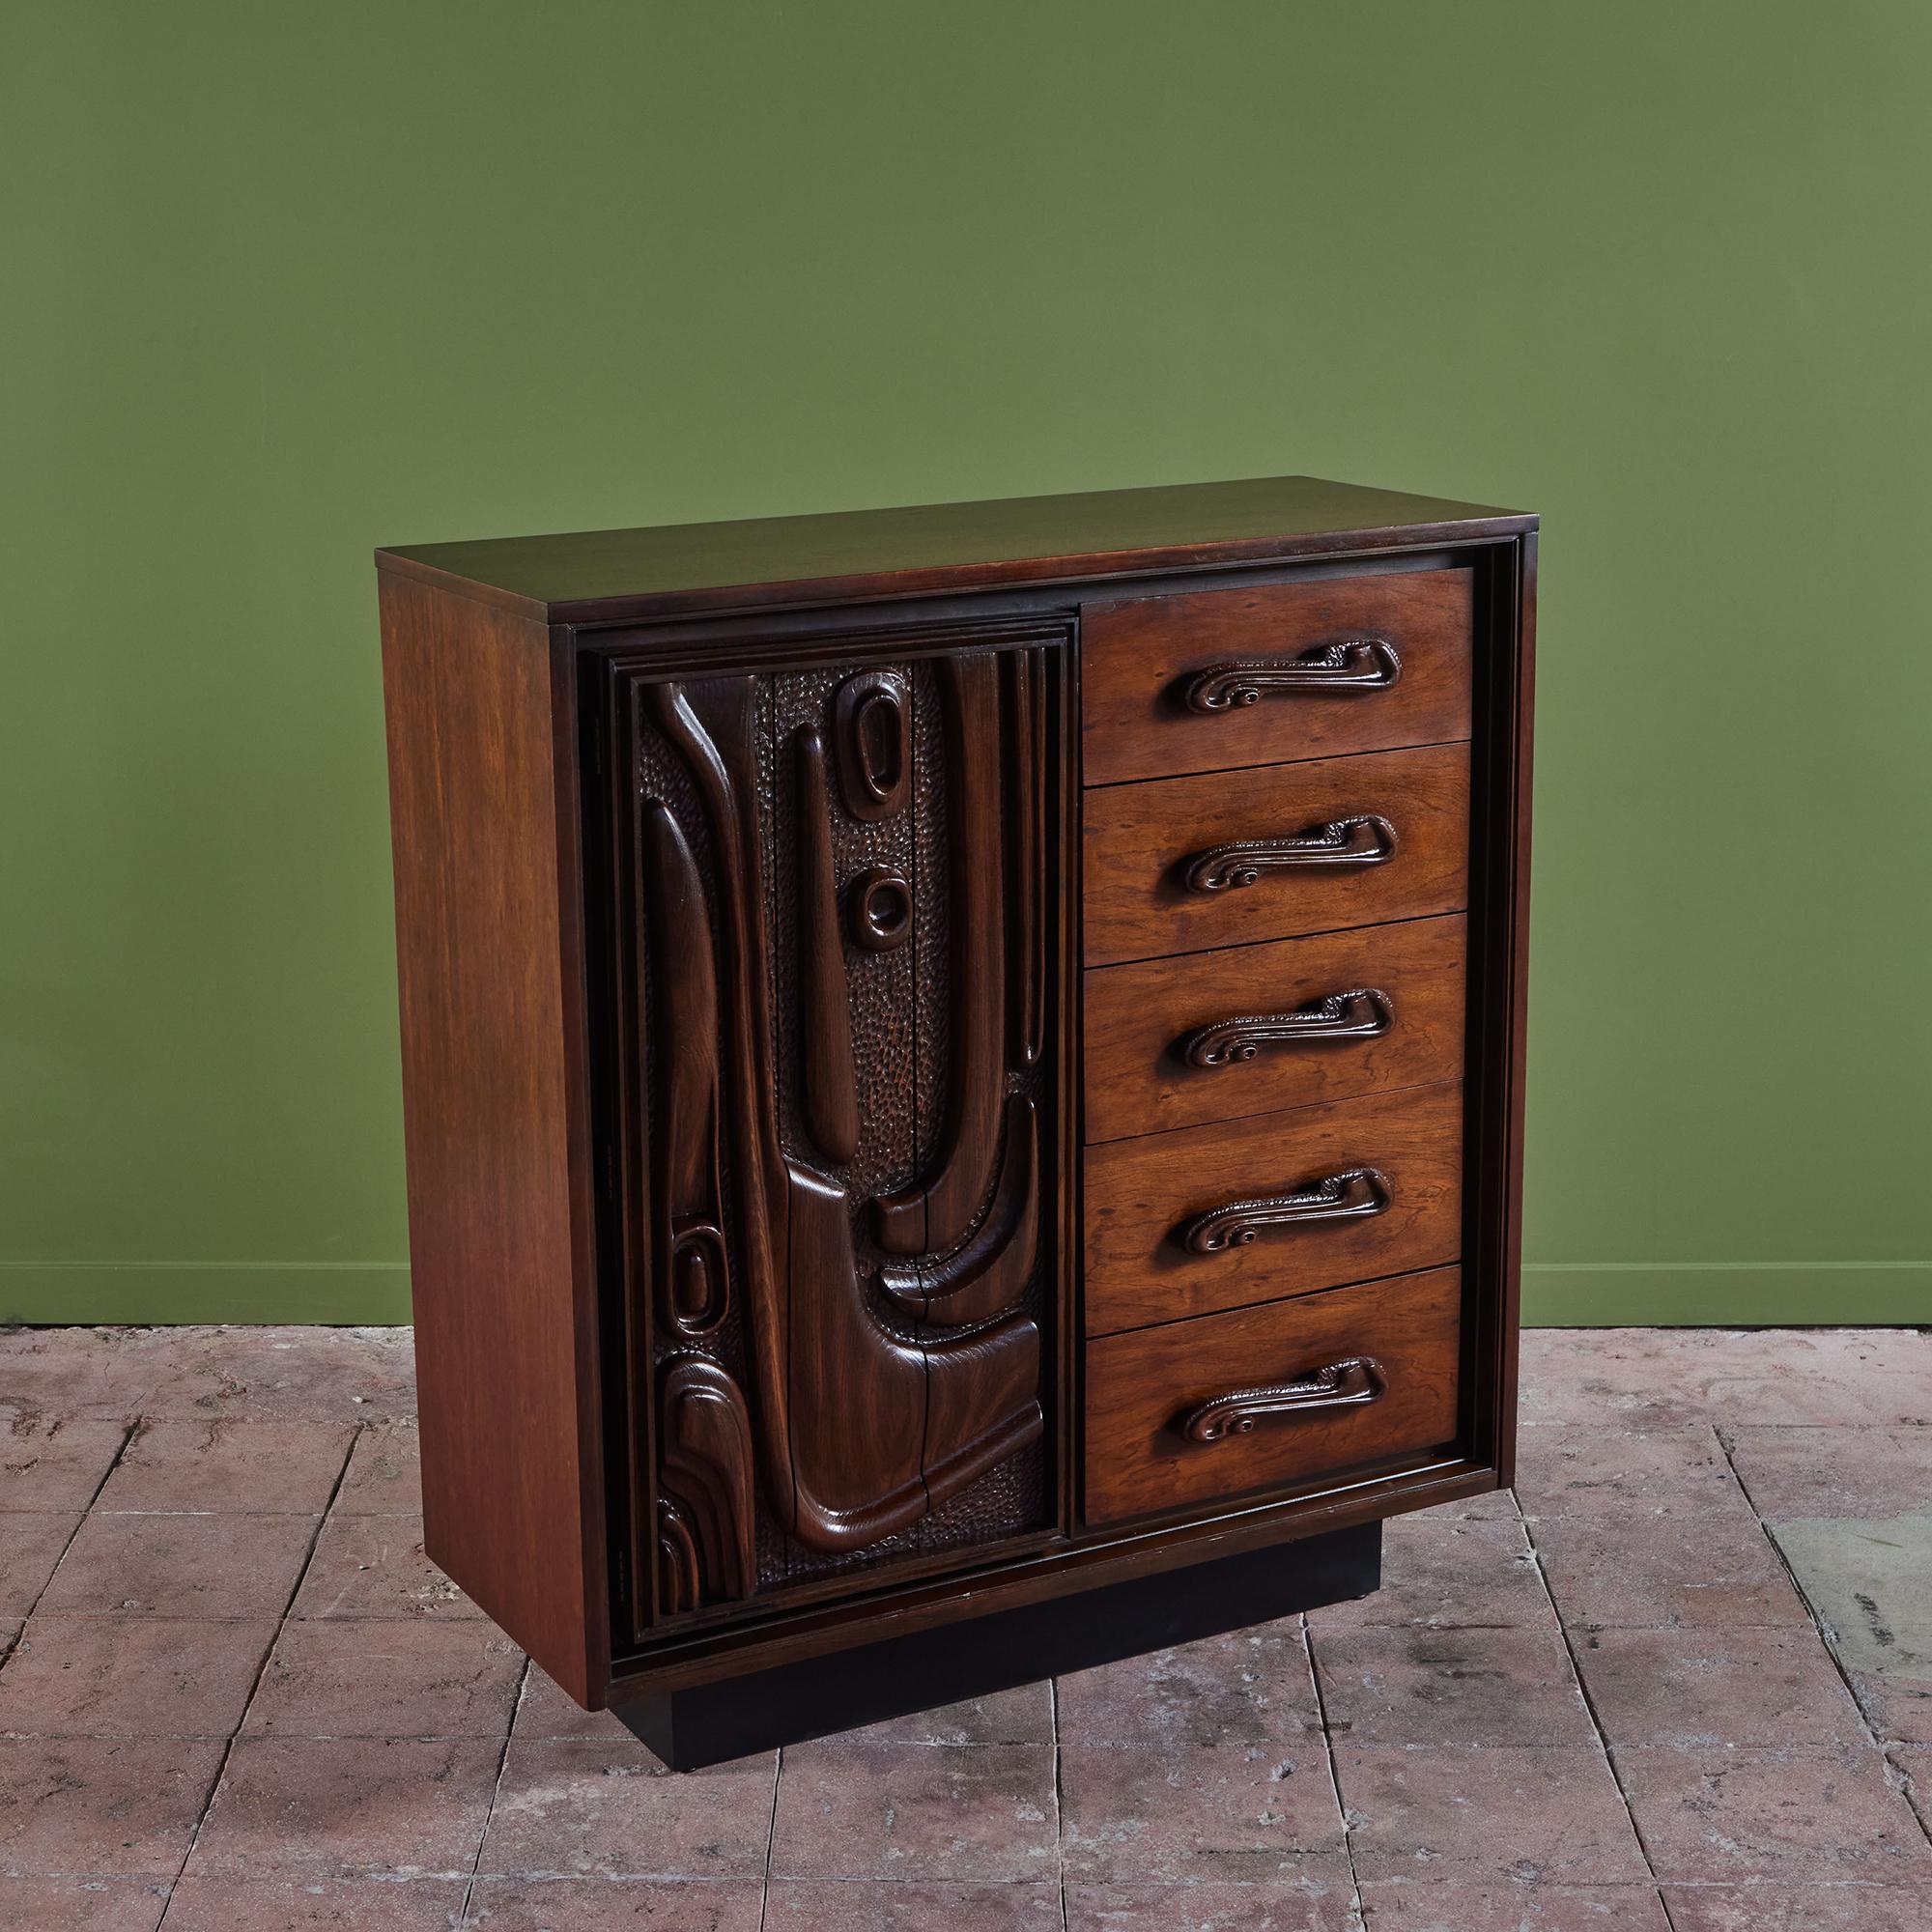 Tall dresser for Pulaski Furniture, c.1960s, USA. The walnut dresser features uniquely sculpted cabinet pulls, reminiscent of waves. One side of the dresser showcases five drawers while the other side has a similarly sculpted cabinet door front,